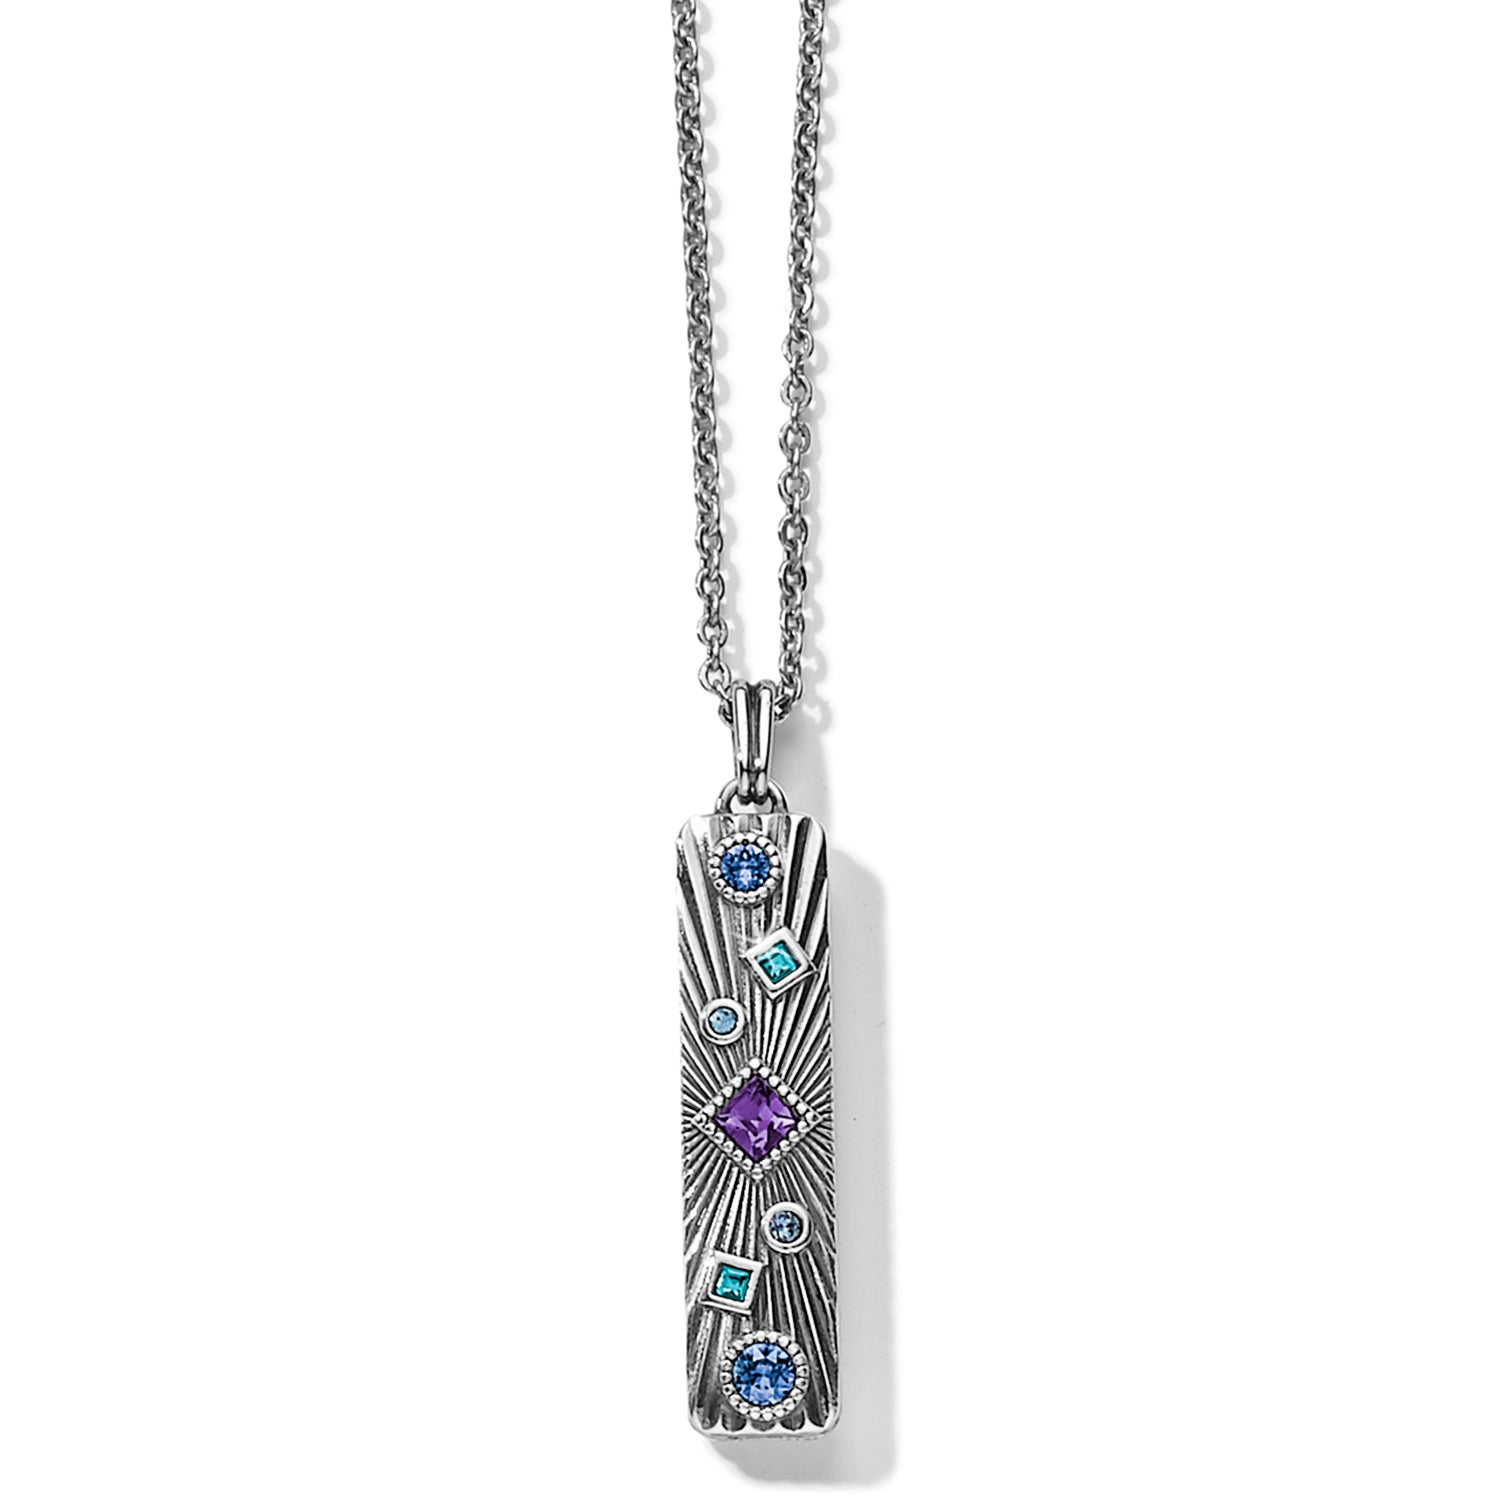 Halo Rays Bar Necklace